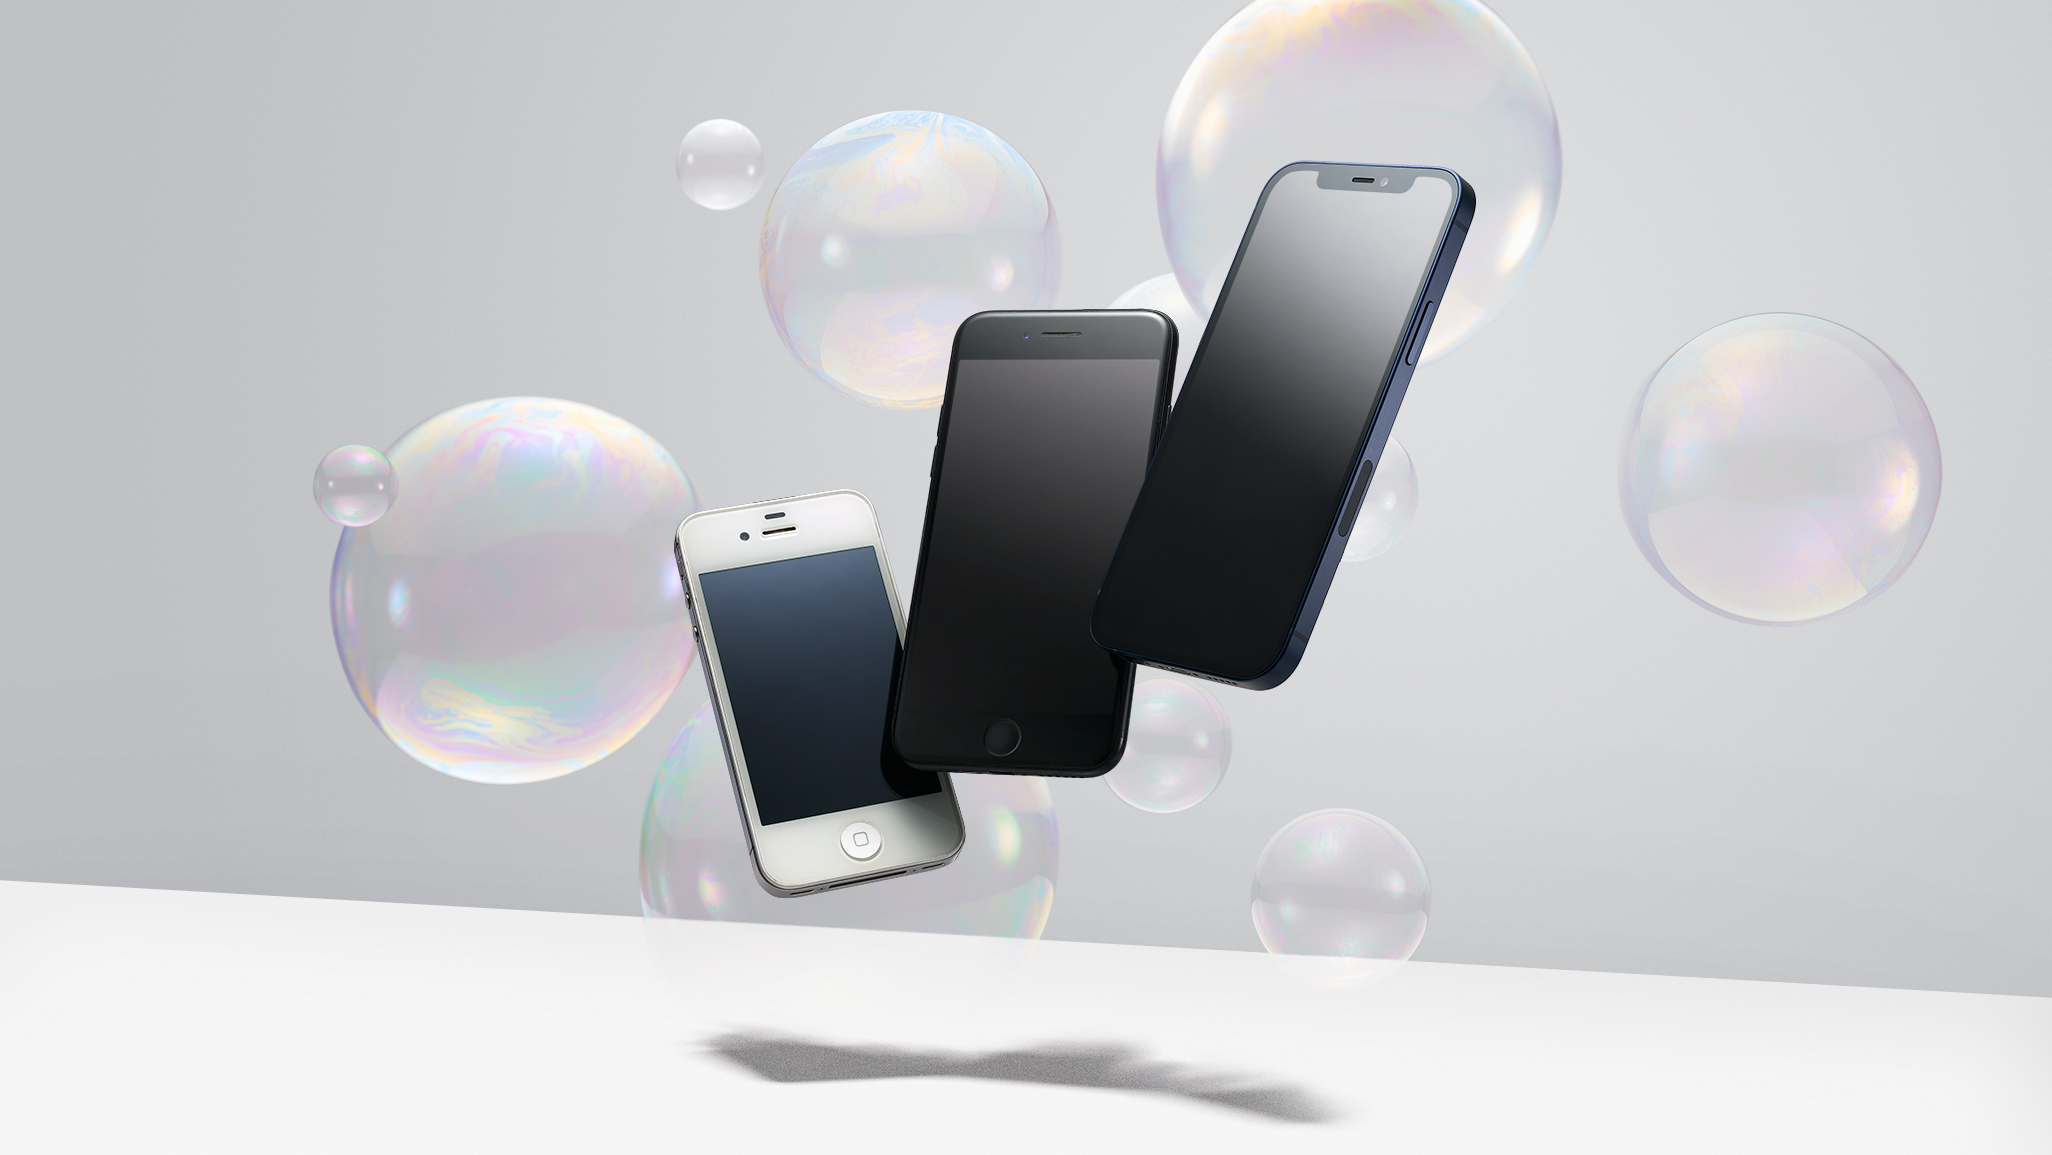 iPhone 3,5, and 8 floating in the air with bubble